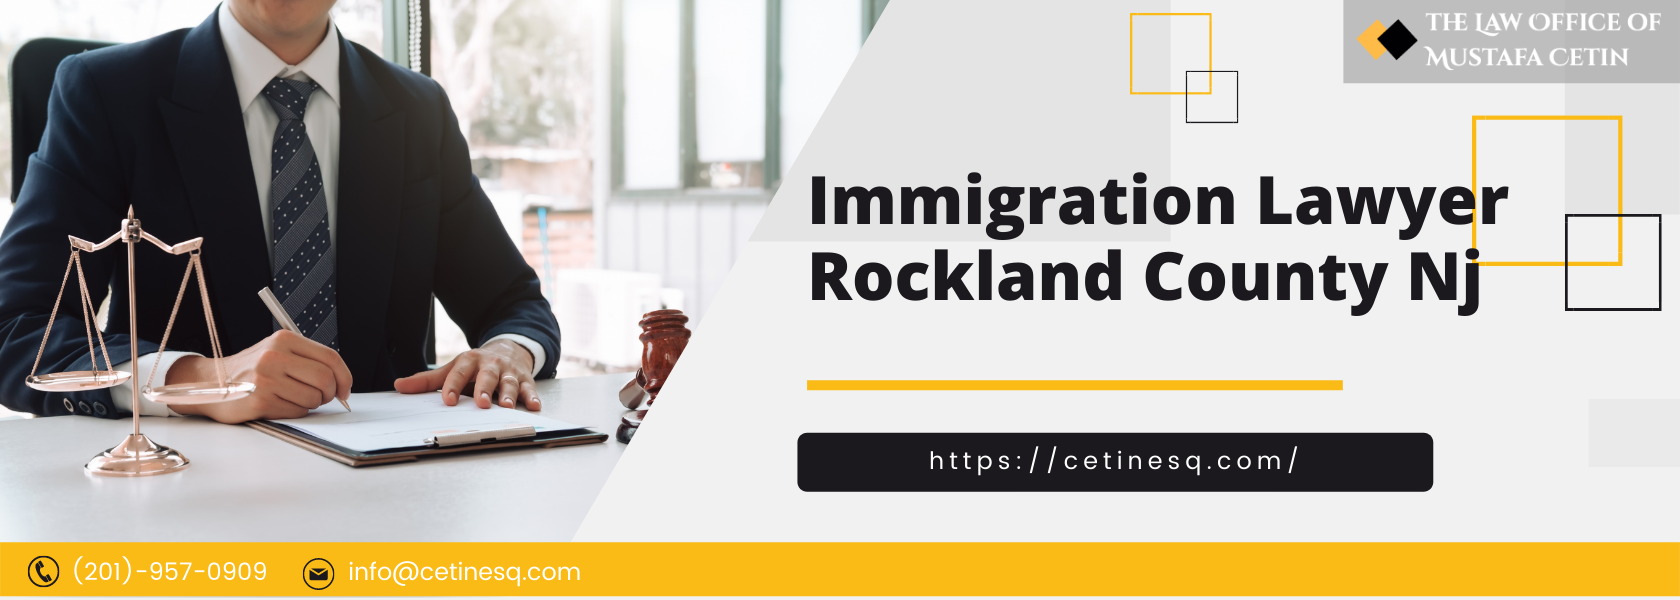 immigration law - Immigration Lawyer Rockland County Nj